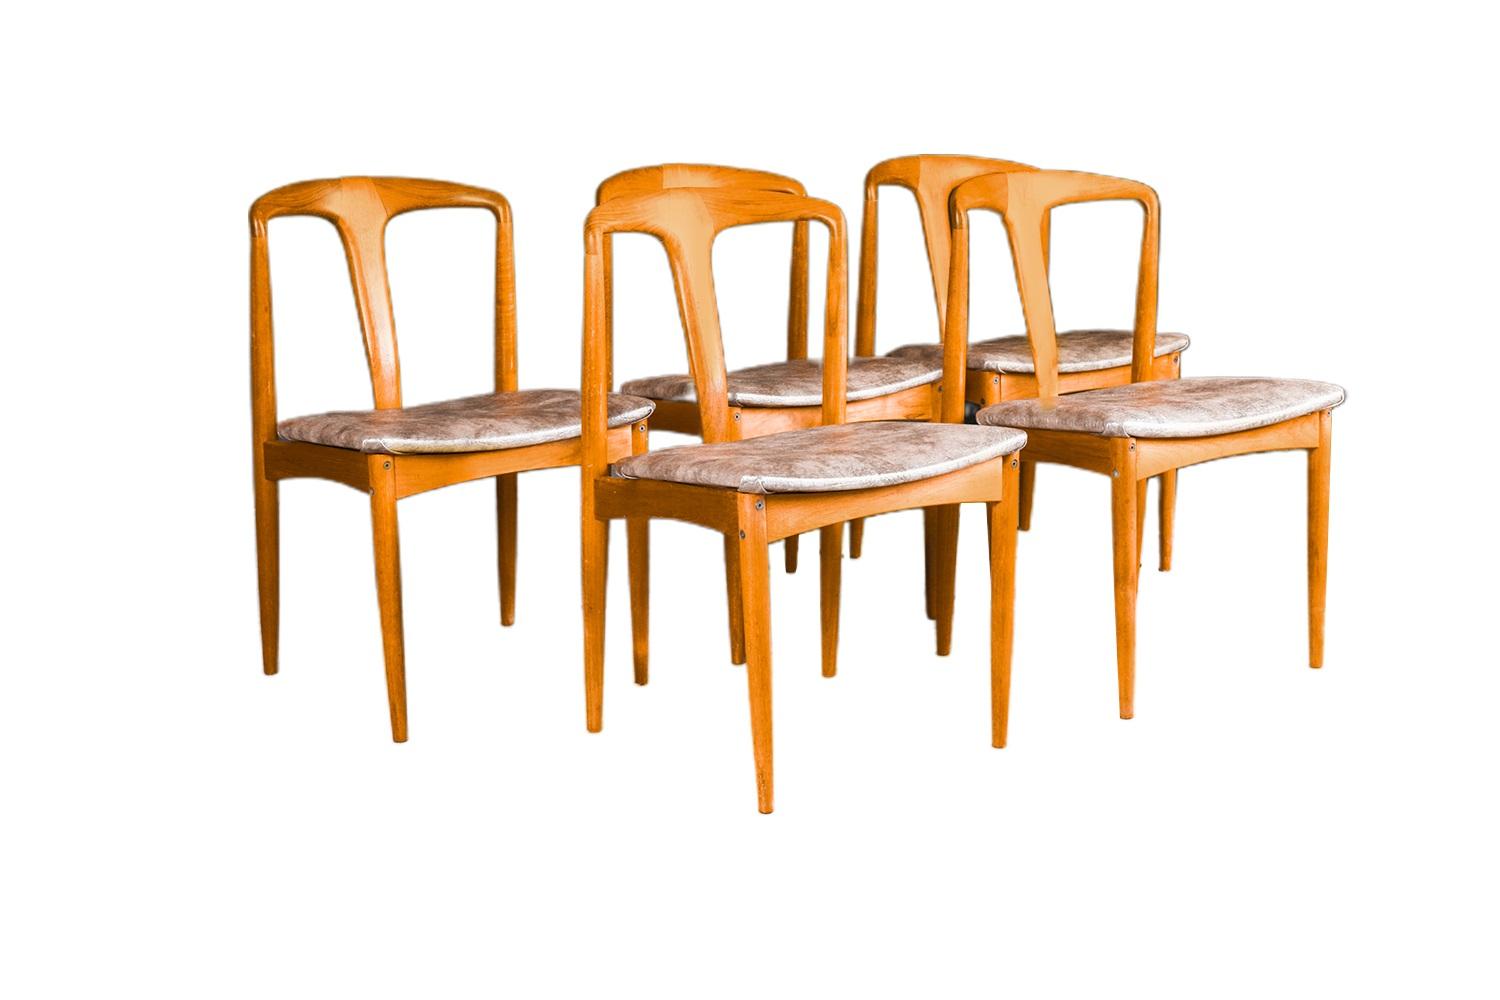 Set of 5 teak Danish modern ‘Juliane’ dining chairs by famous designer Johannes Andersen for Uldum Møbelfabrik, made in Denmark, circa 1960s. Superbly crafted in rich solid teak frames, remarkably notable are the carved sculpted backrests with